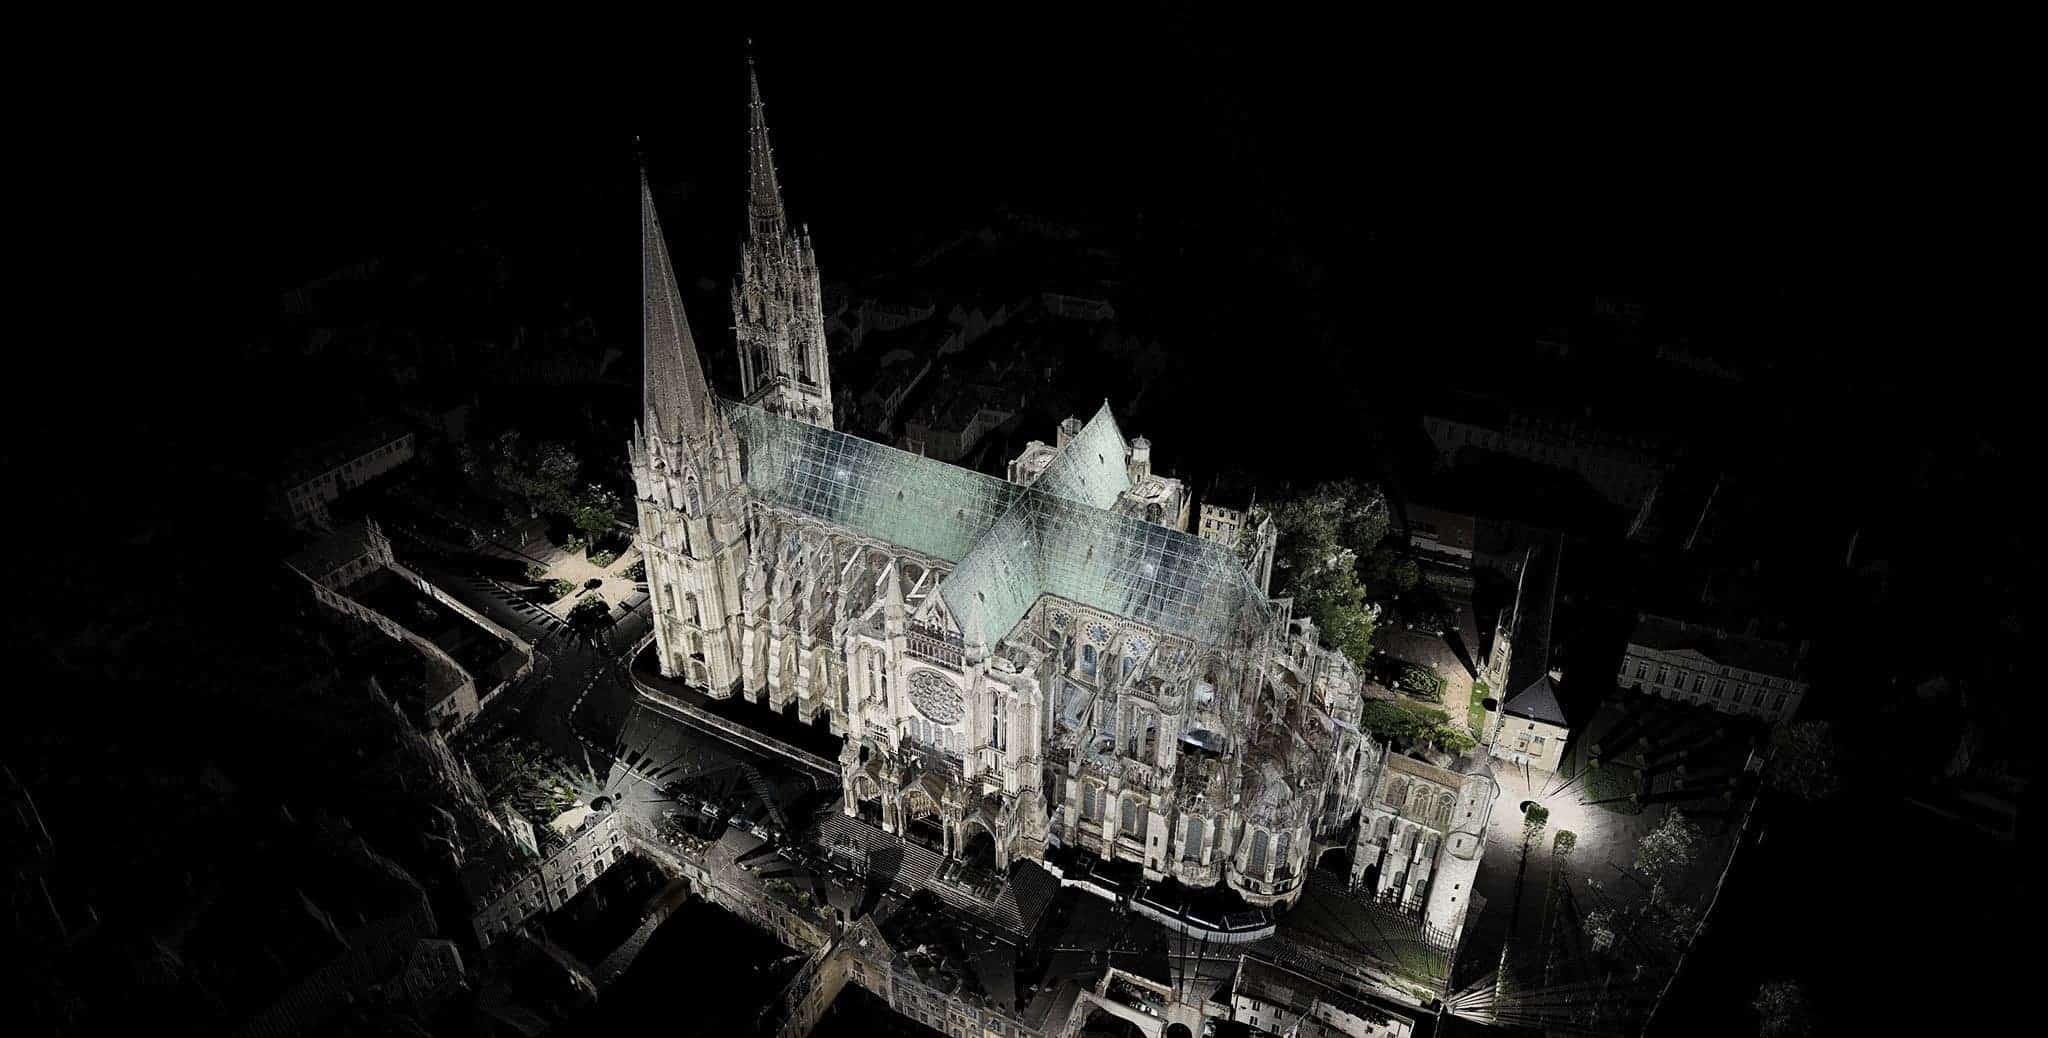 Digital reconstruction of Notre Dame cathedral performed with laser scanners. Credit: Andrew Tallon.